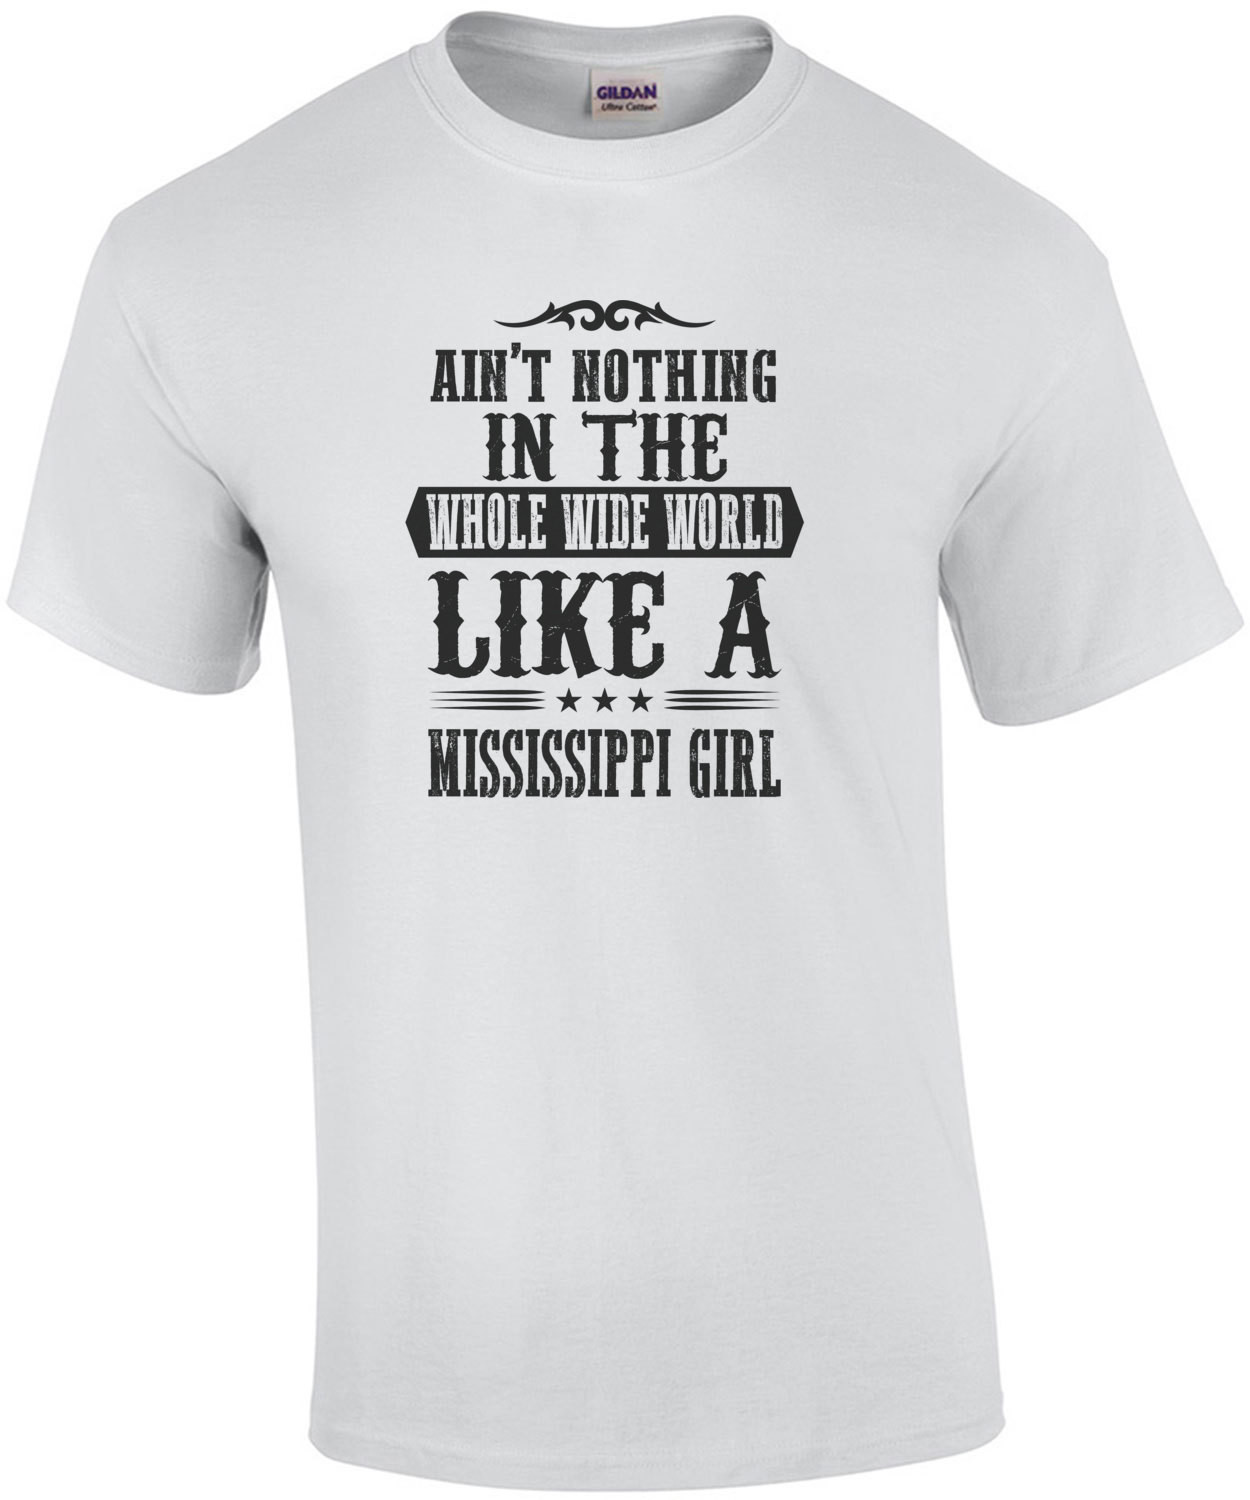 Ain't nothing in the whole world like a mississippi girl - Mississippi T-Shirt